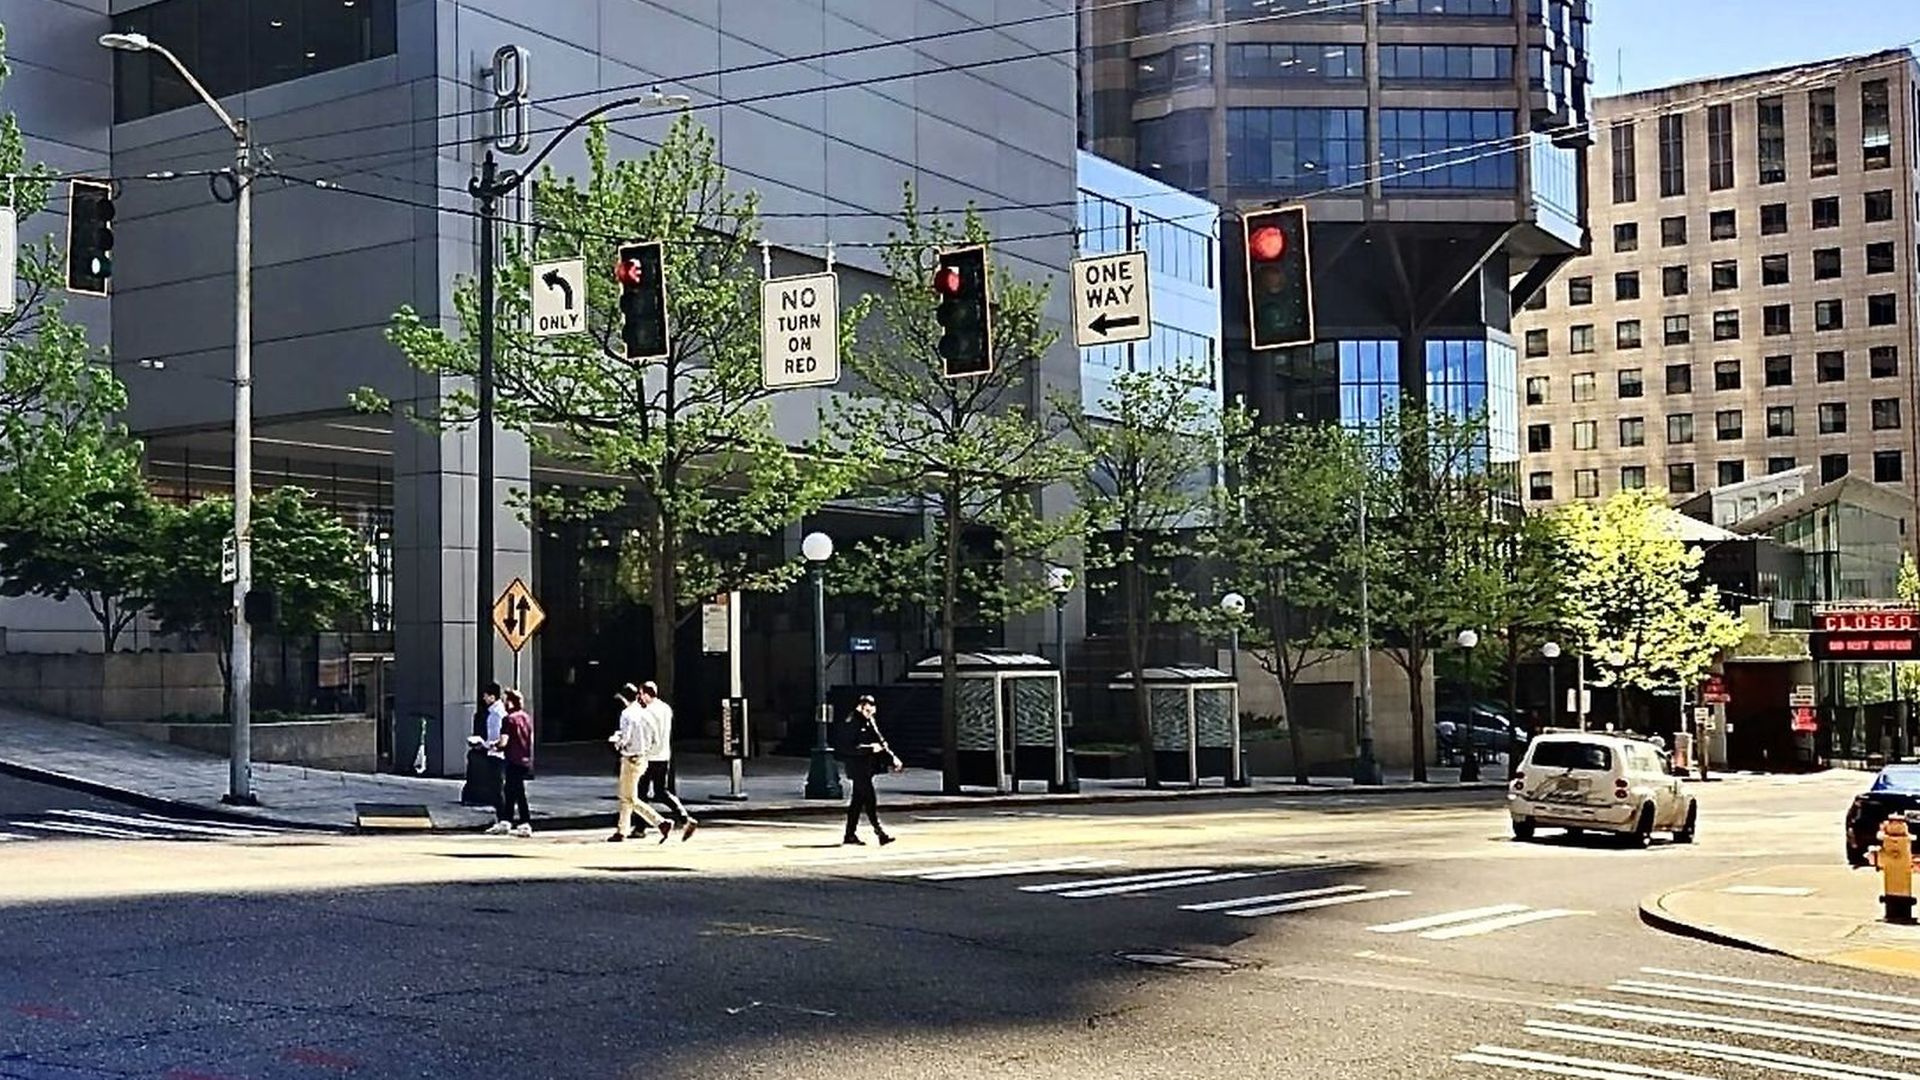 A view of an intersection with "No Right on Red" signs and people crossing in Seattle.